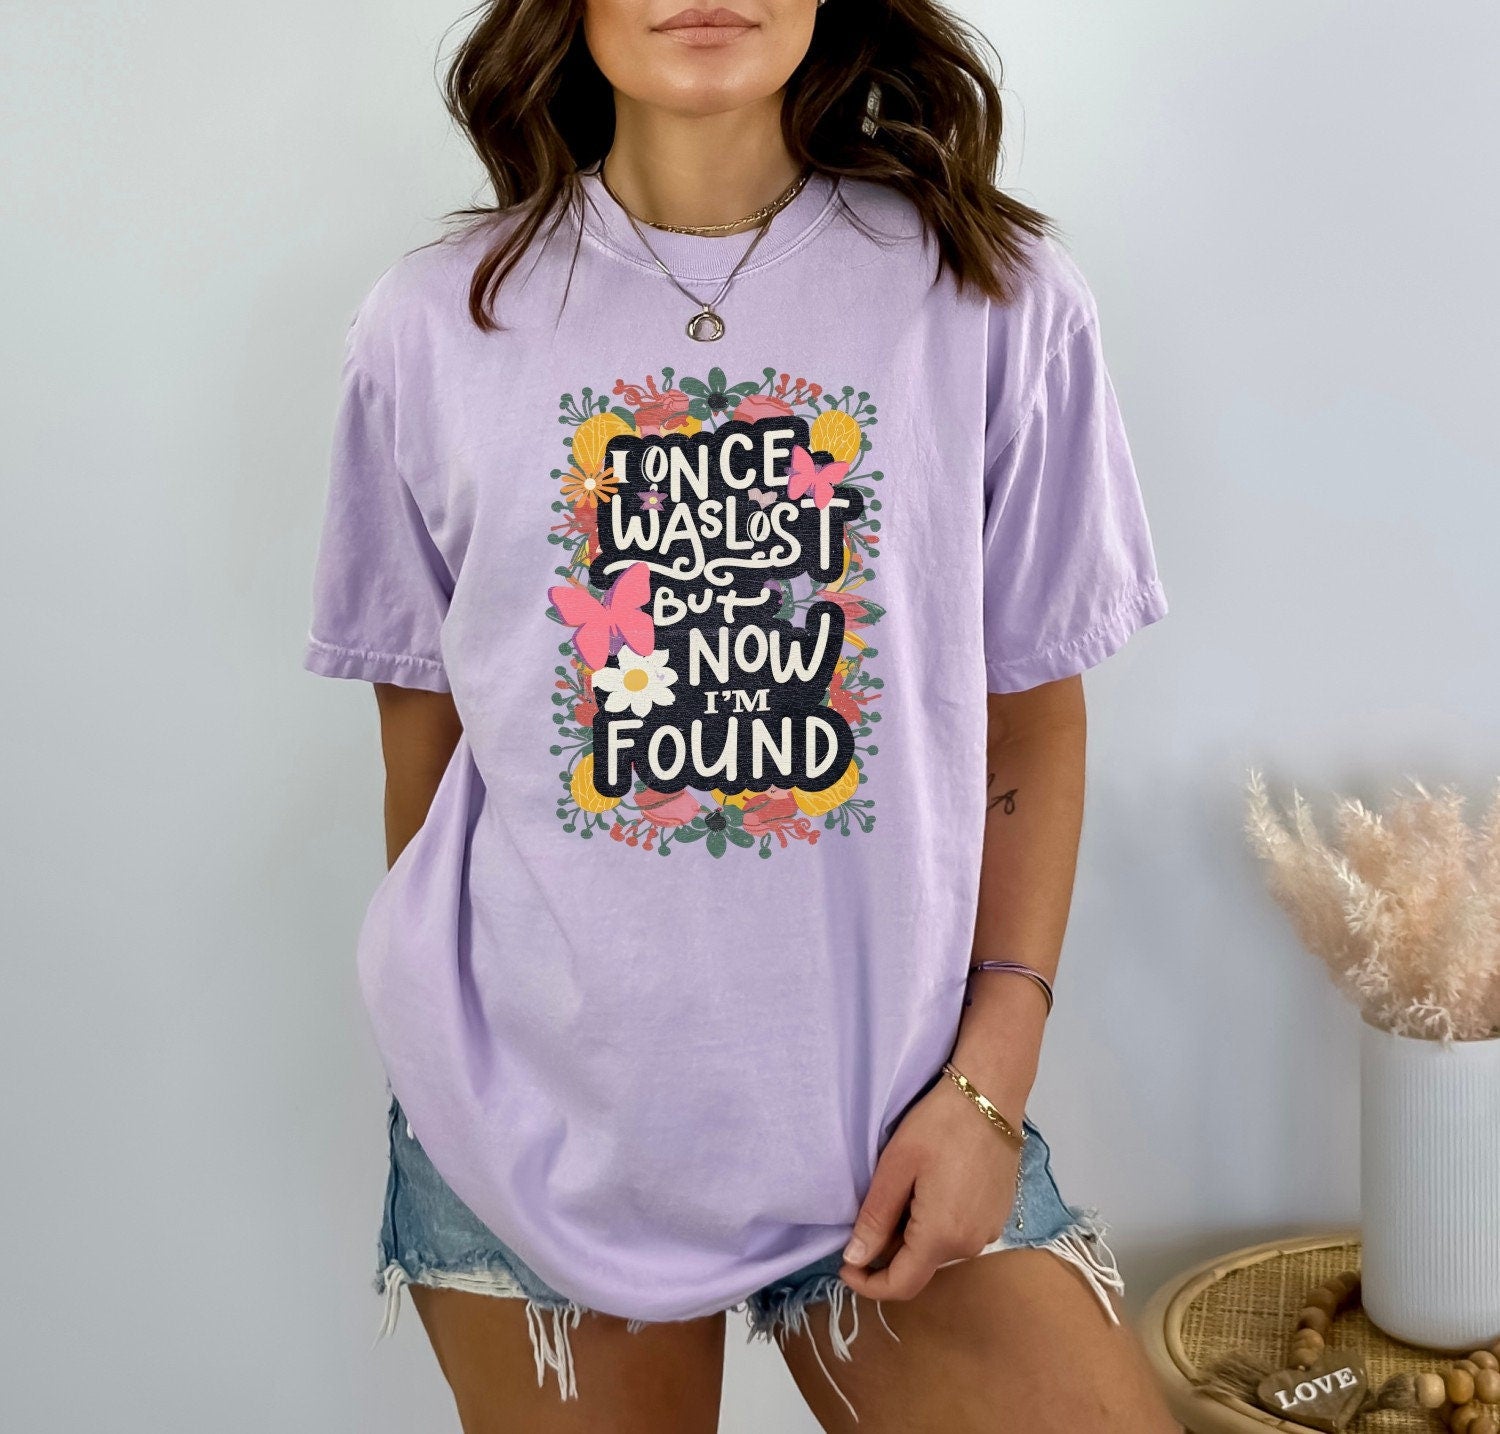 Christian Shirts Religious Tshirt Christian T Shirts Boho Christian Shirt Bible Verse Shirt I Once Was Lost But Now I'm Found Shirt